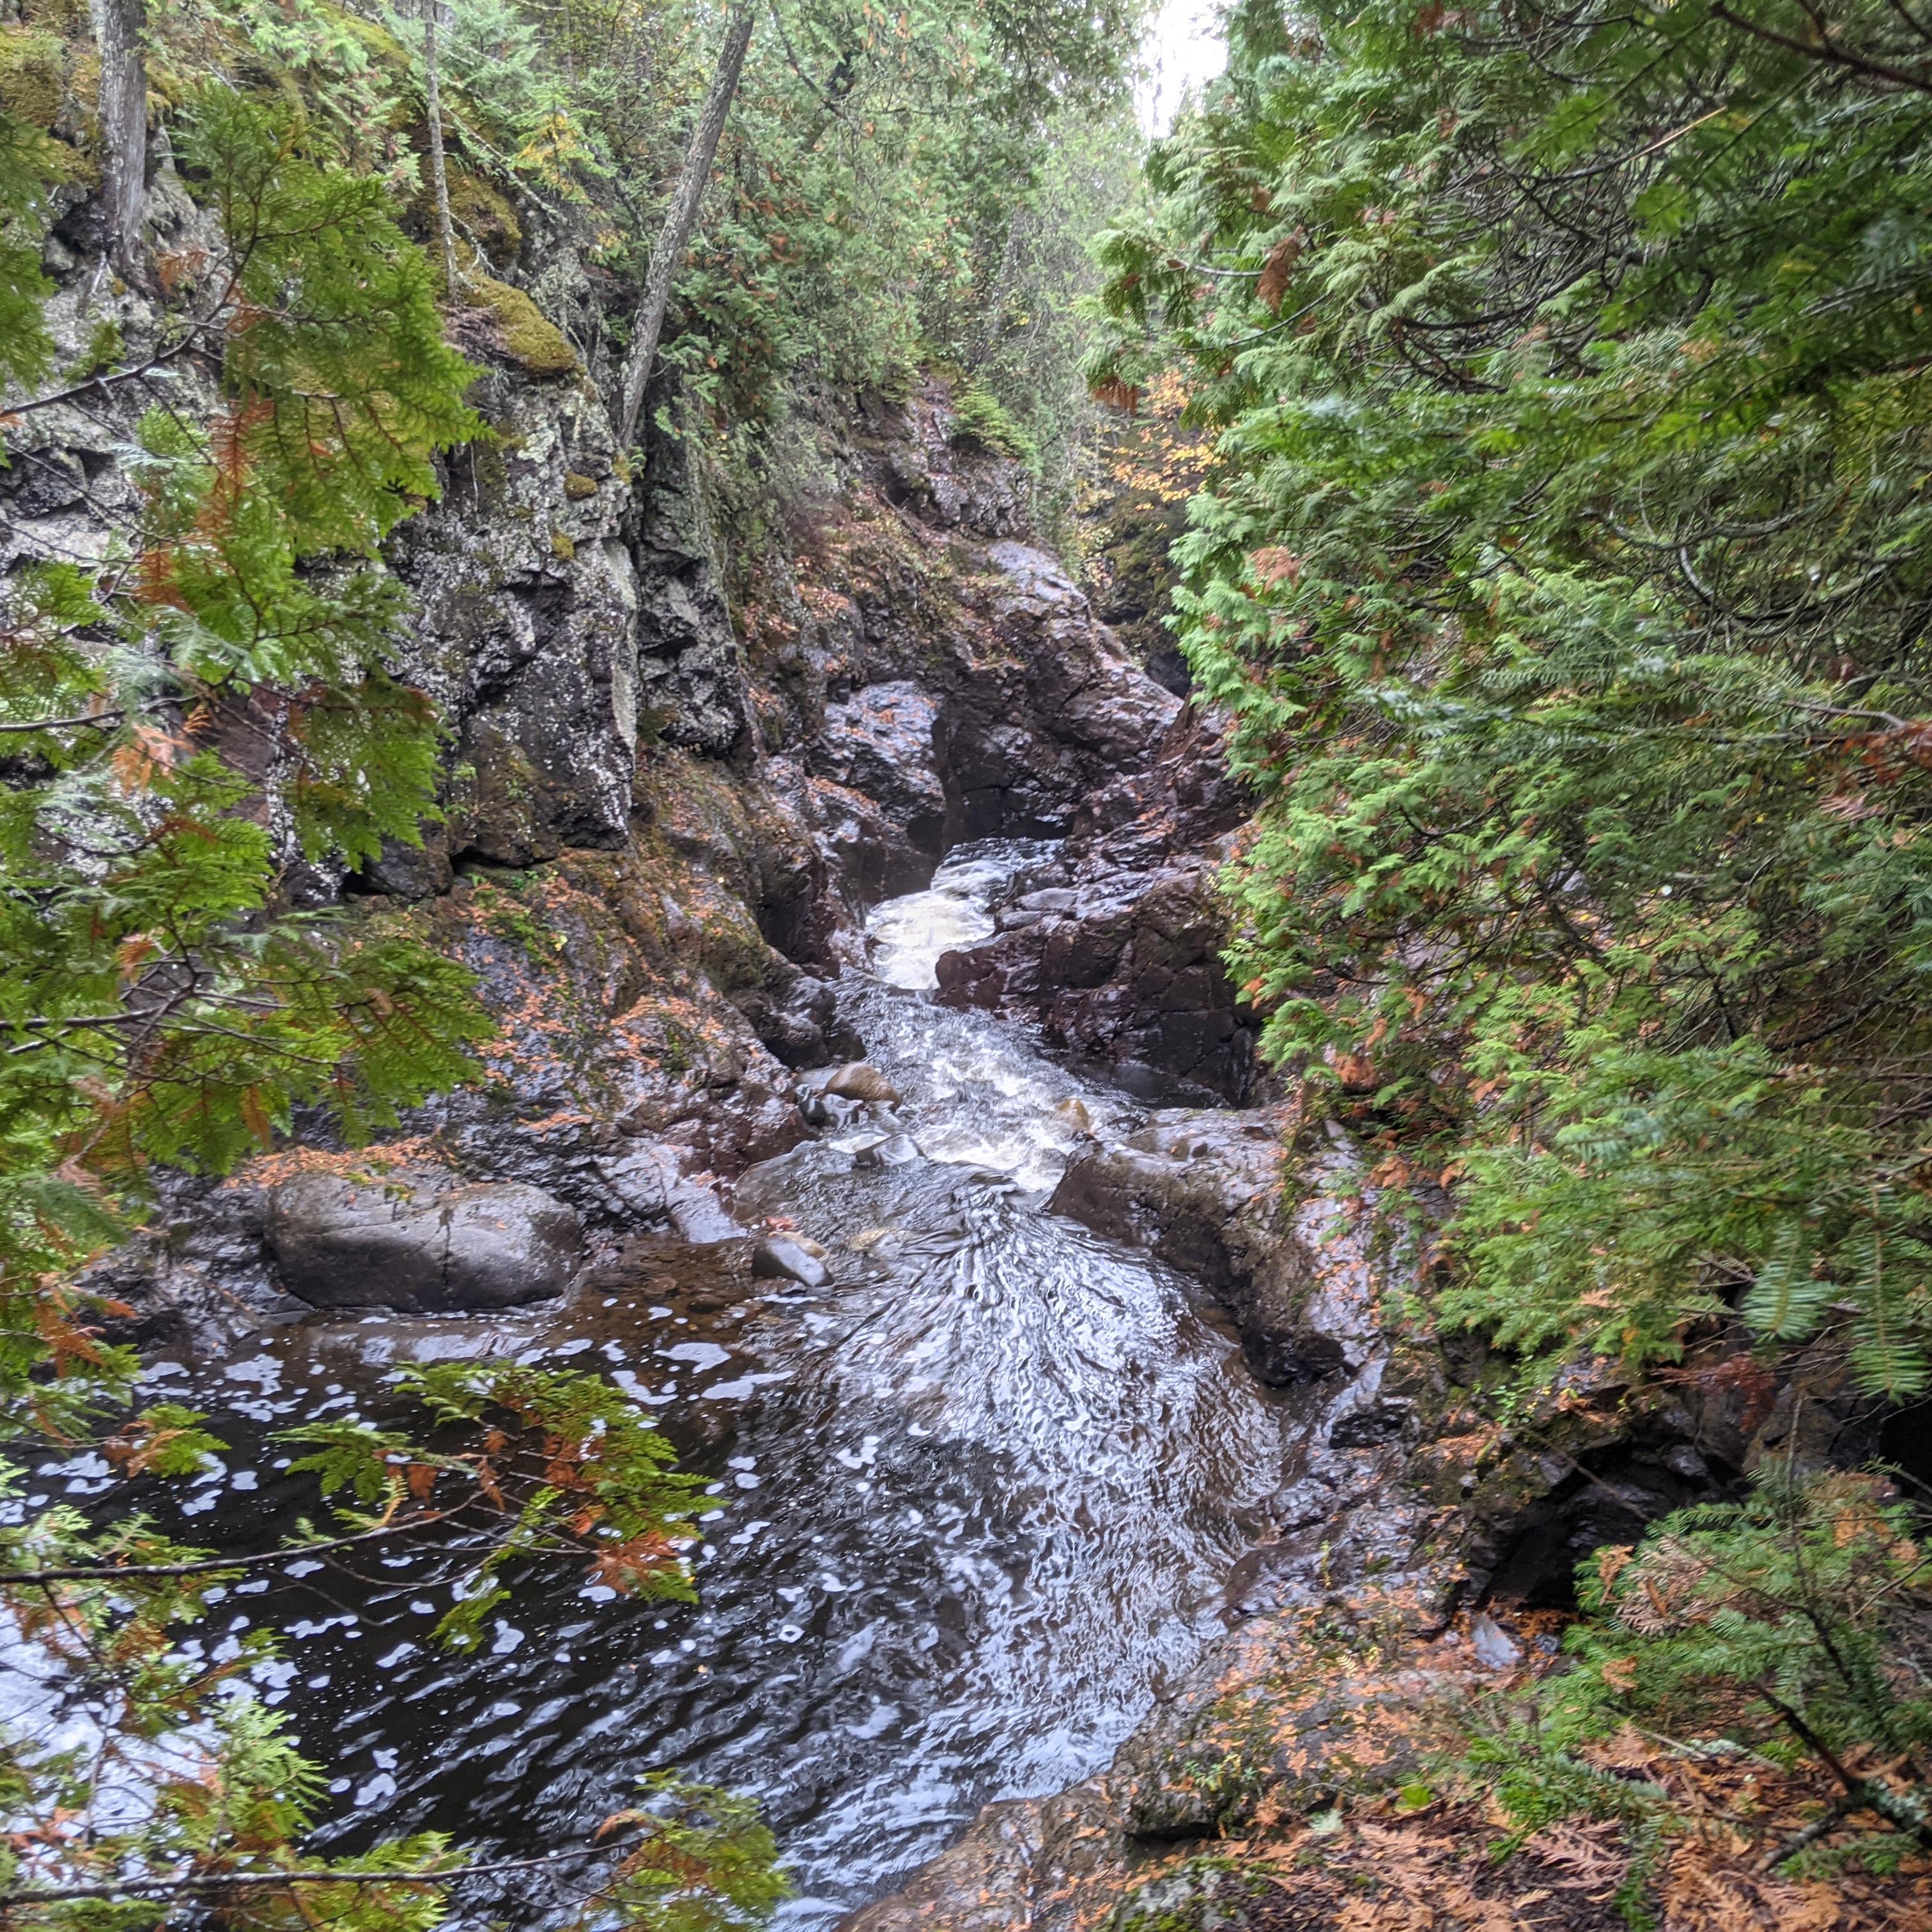 A photograph of the Cascade River in fall.